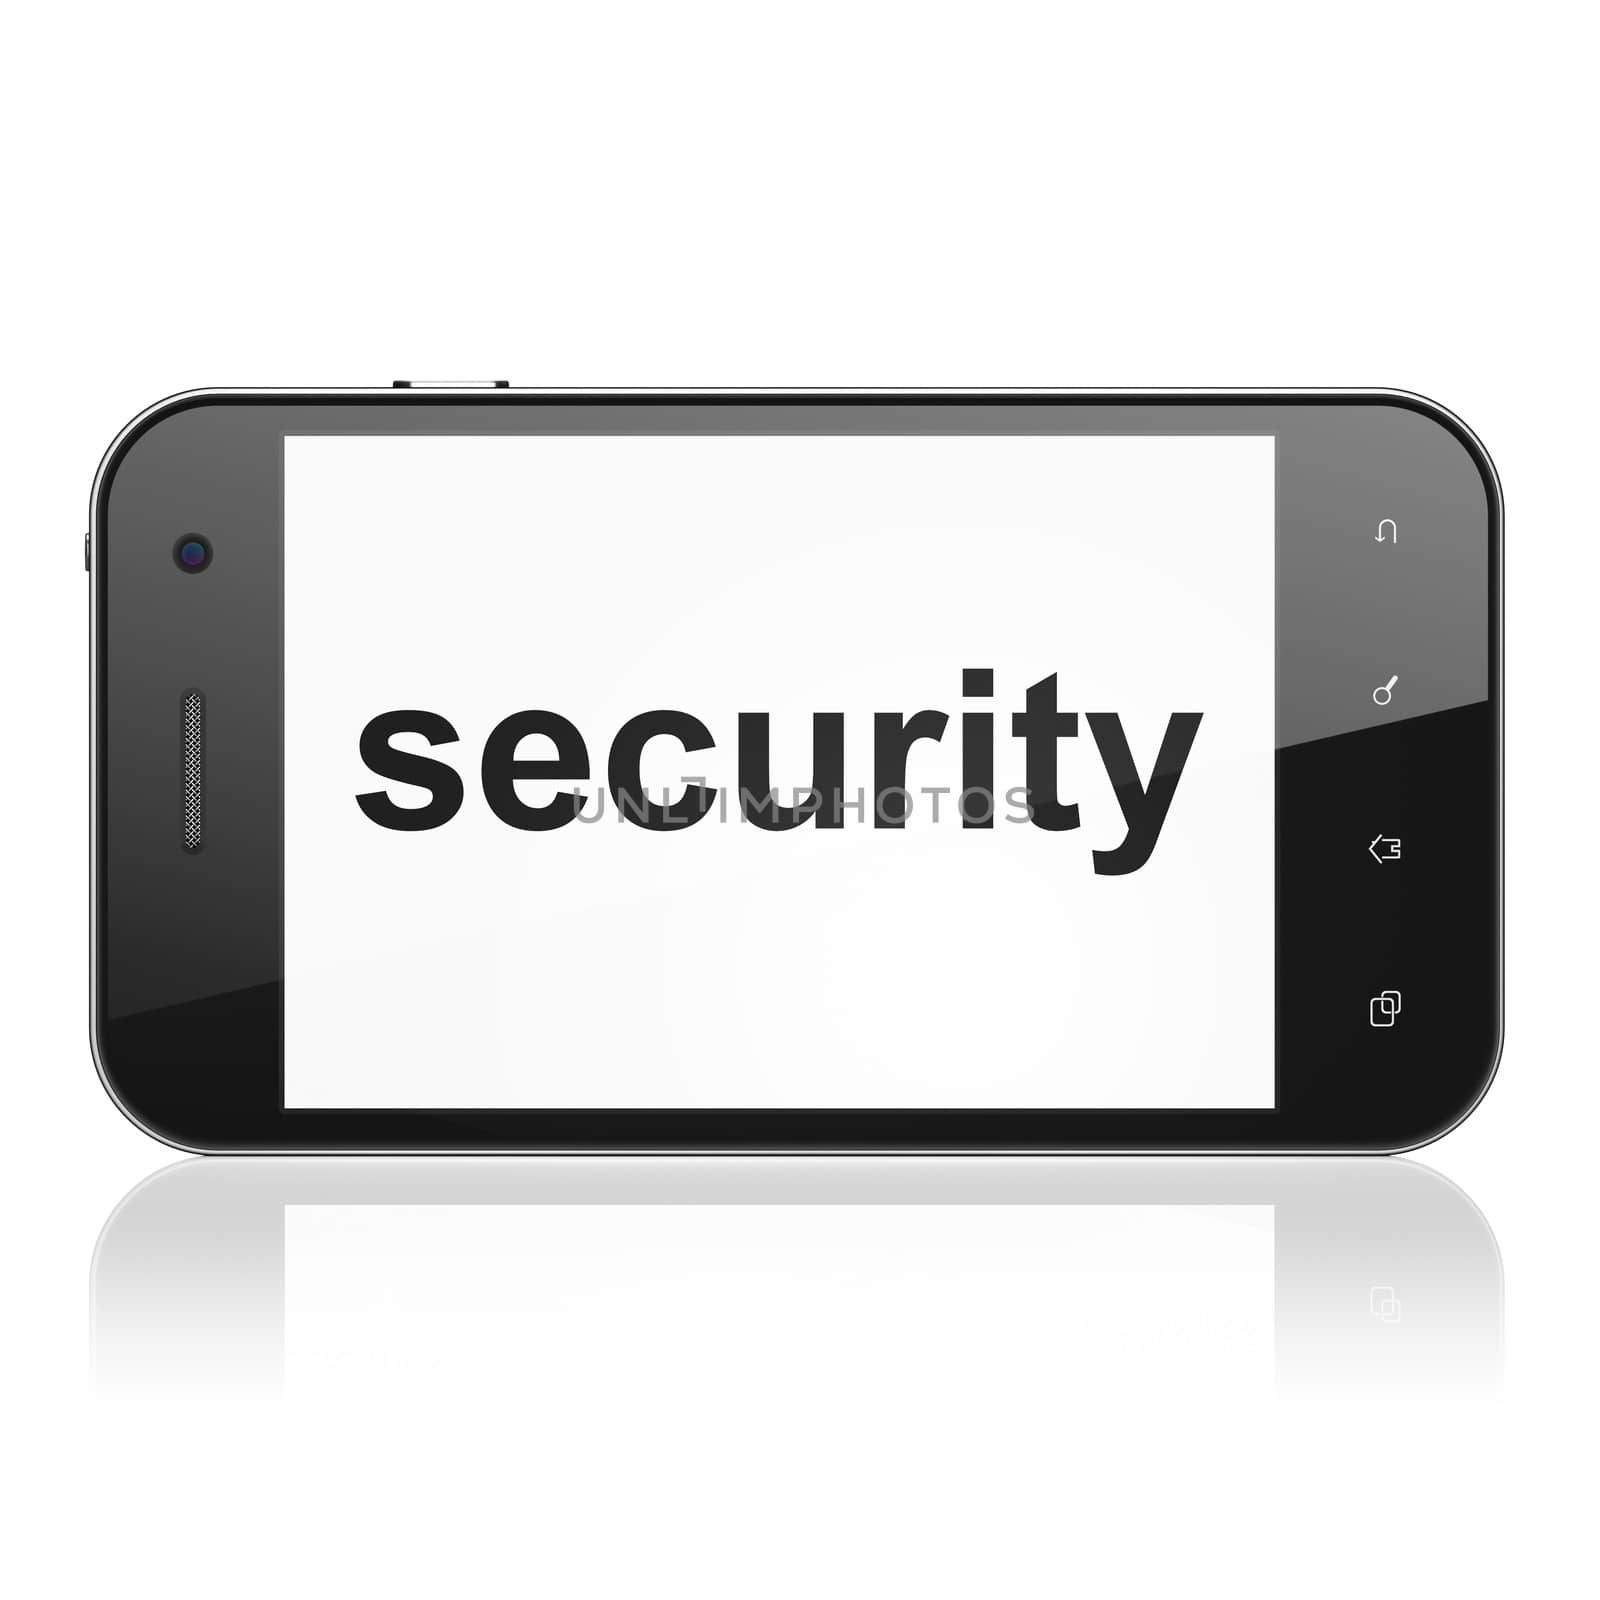 Safety concept: smartphone with text Security on display. Mobile smart phone on White background, cell phone 3d render